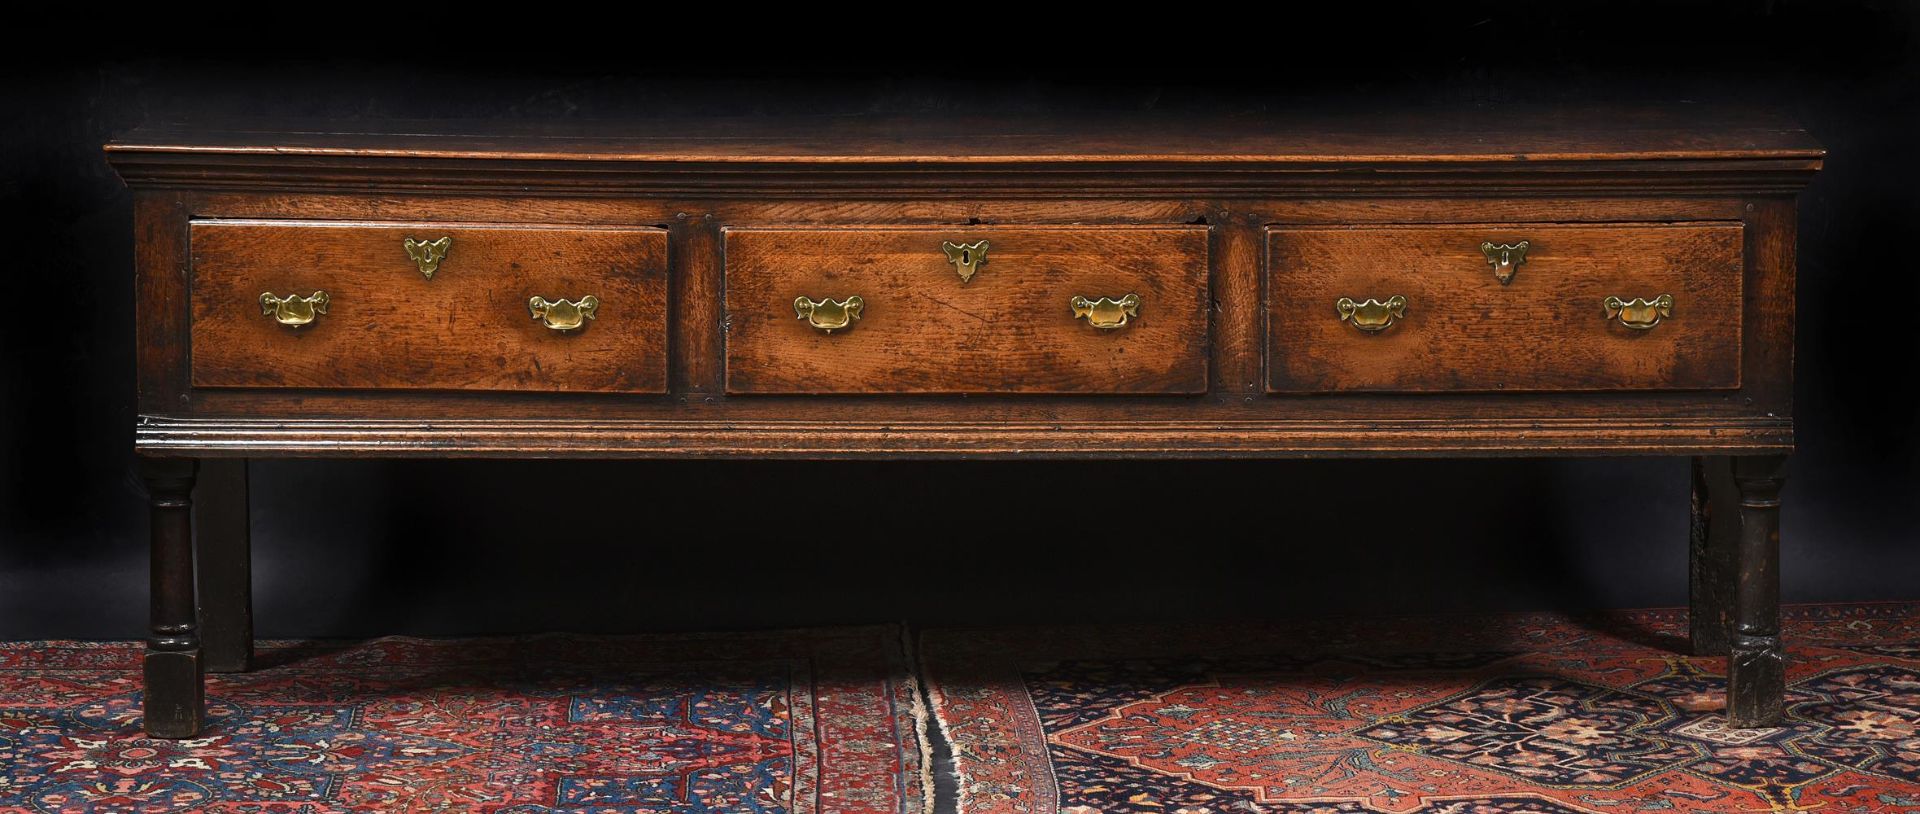 AN OAK DRESSER BASE, LATE 17TH OR EARLY 18TH CENTURY